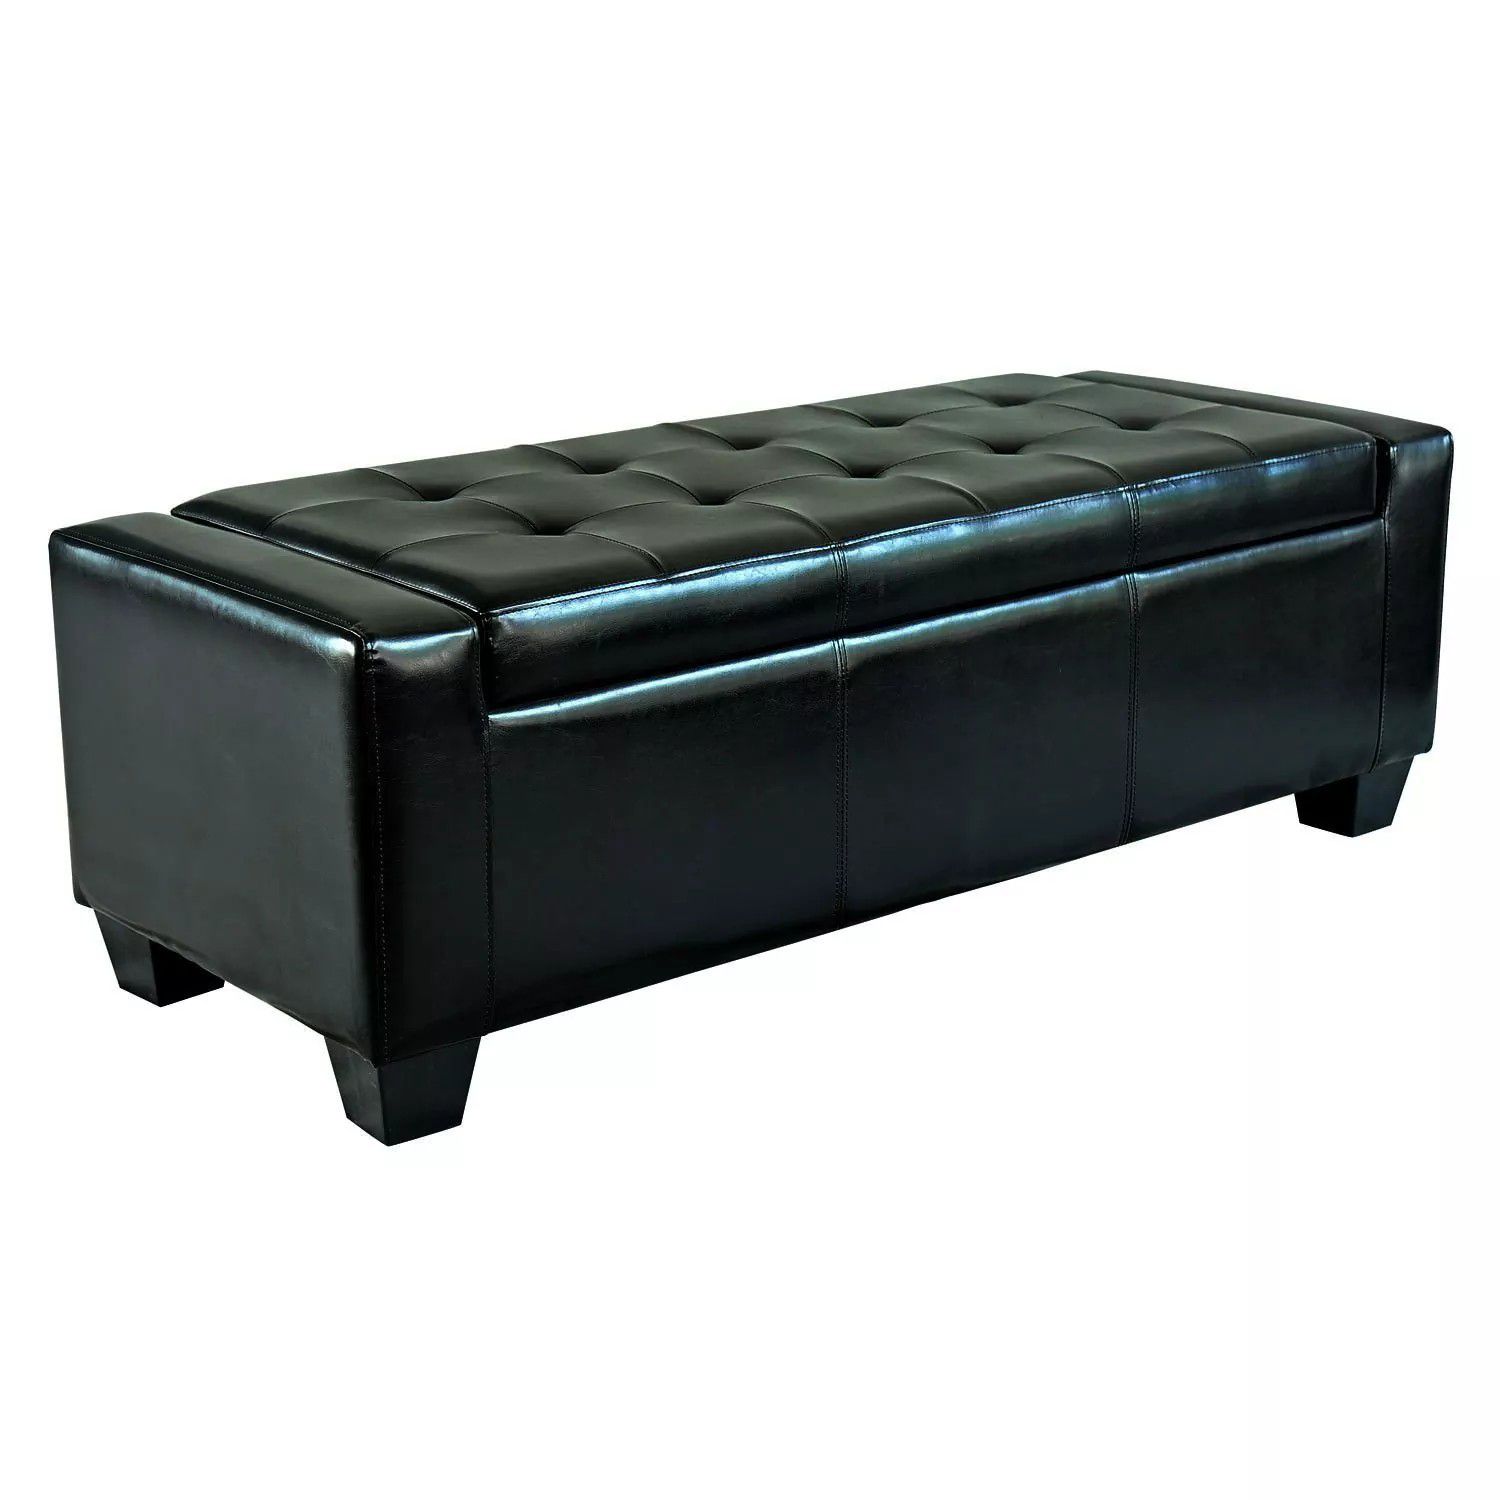 Faux Leather Tufted Storage Ottoman Bench Seat